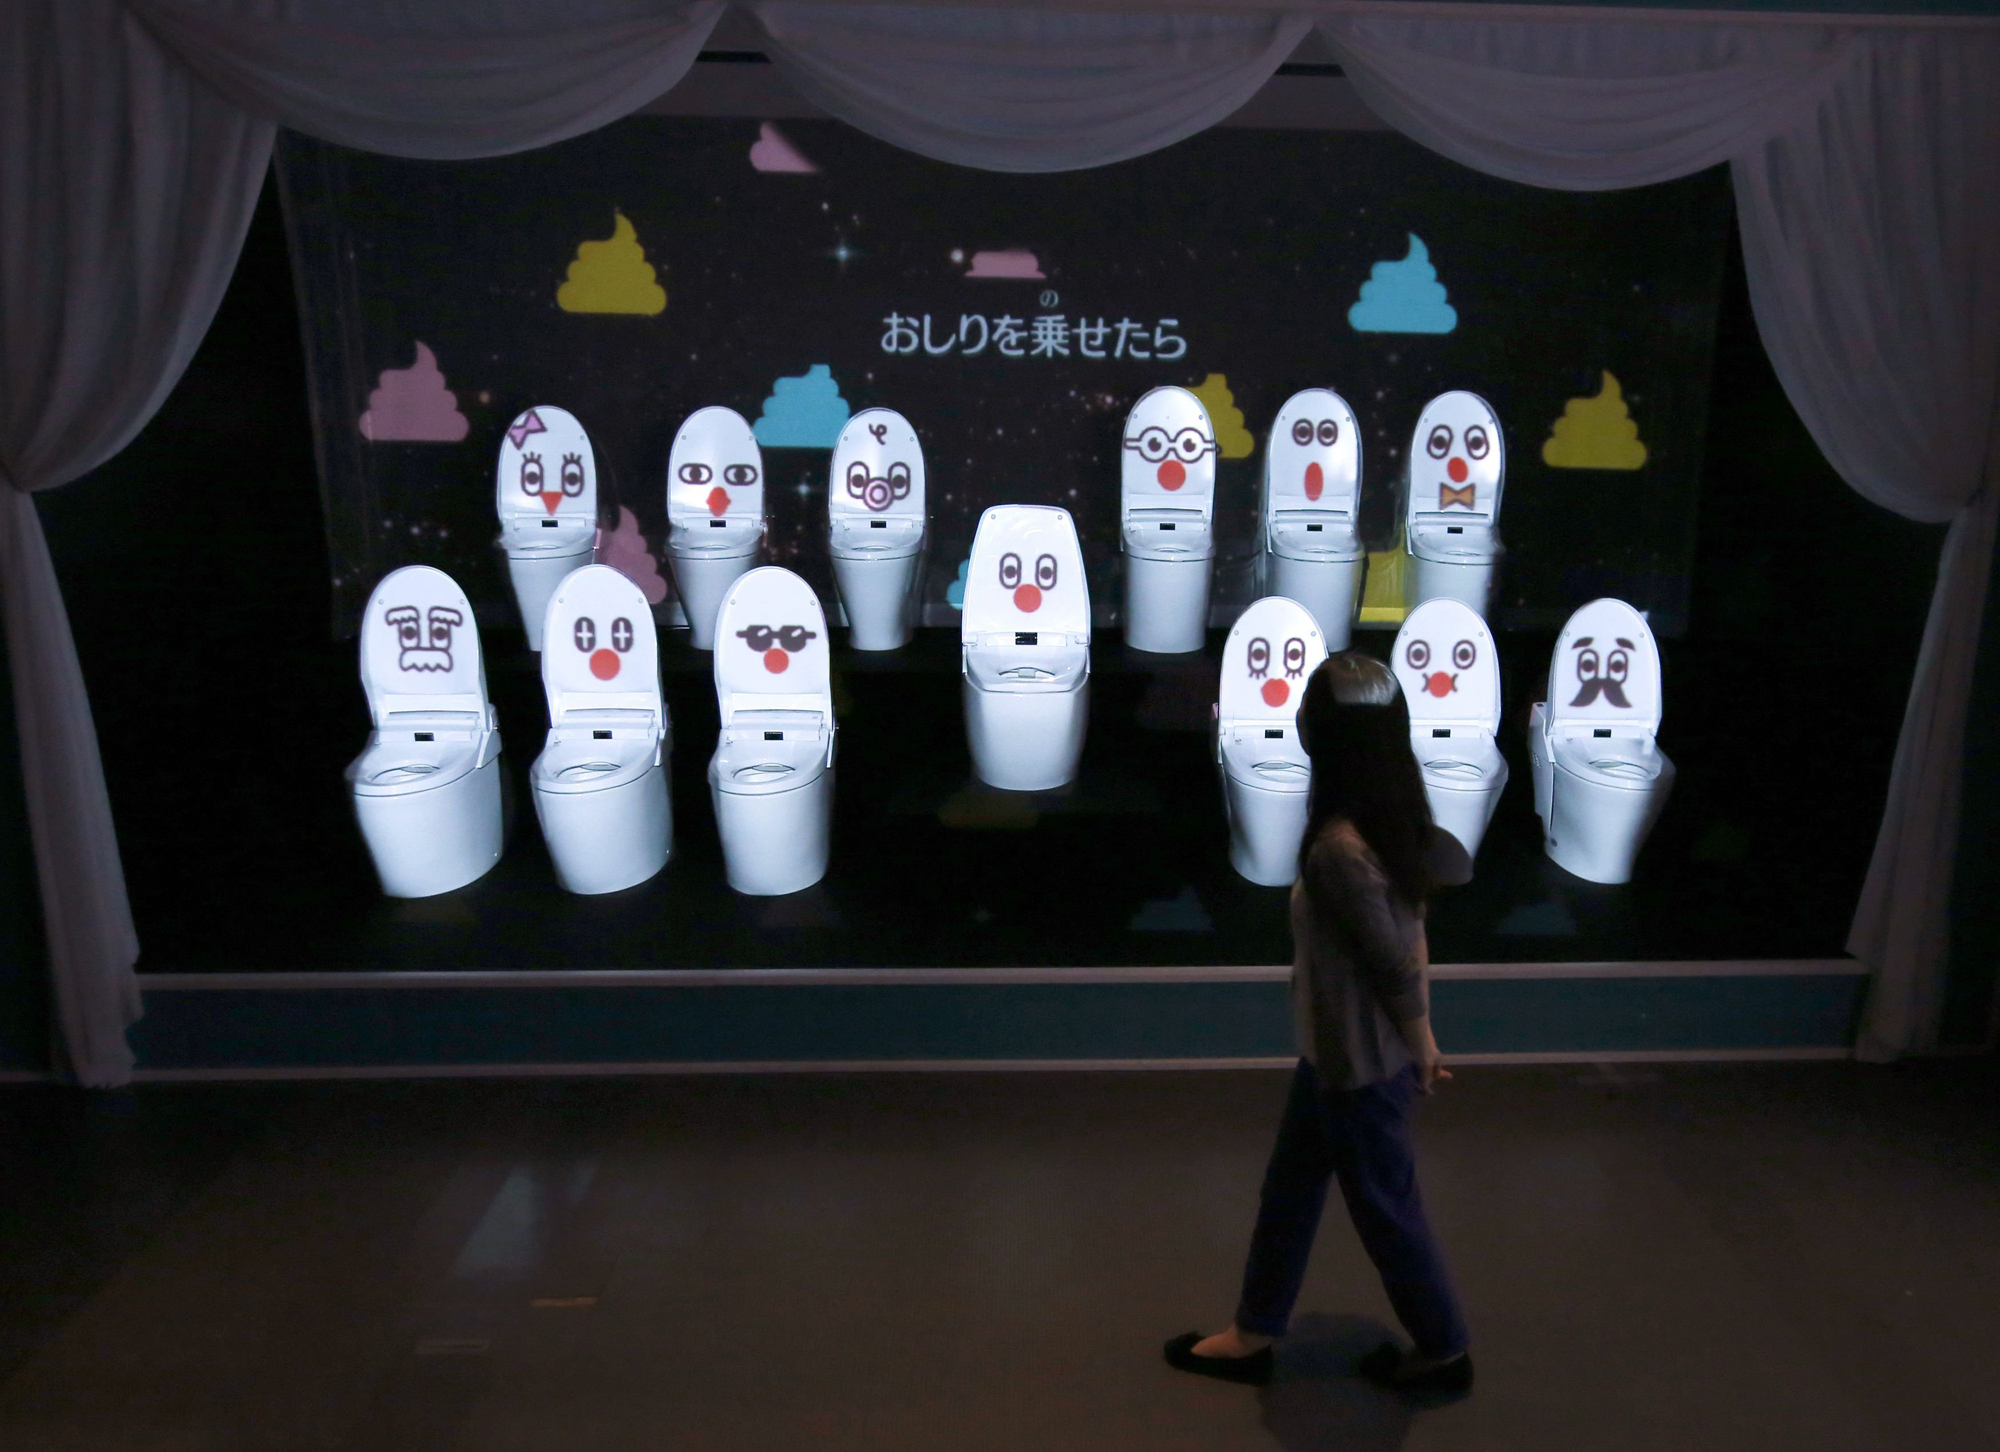 A woman walks past a choir of toilets that sing to thank visitors for putting in the effort of trying to learn more about what is normally a taboo topic of sitting on them, at an exhibition titled  Toilet !? Human Waste and Earth's Future  at the Miraikan National Museum of Emerging Science and Innovation in Tokyo July 3, 2014.